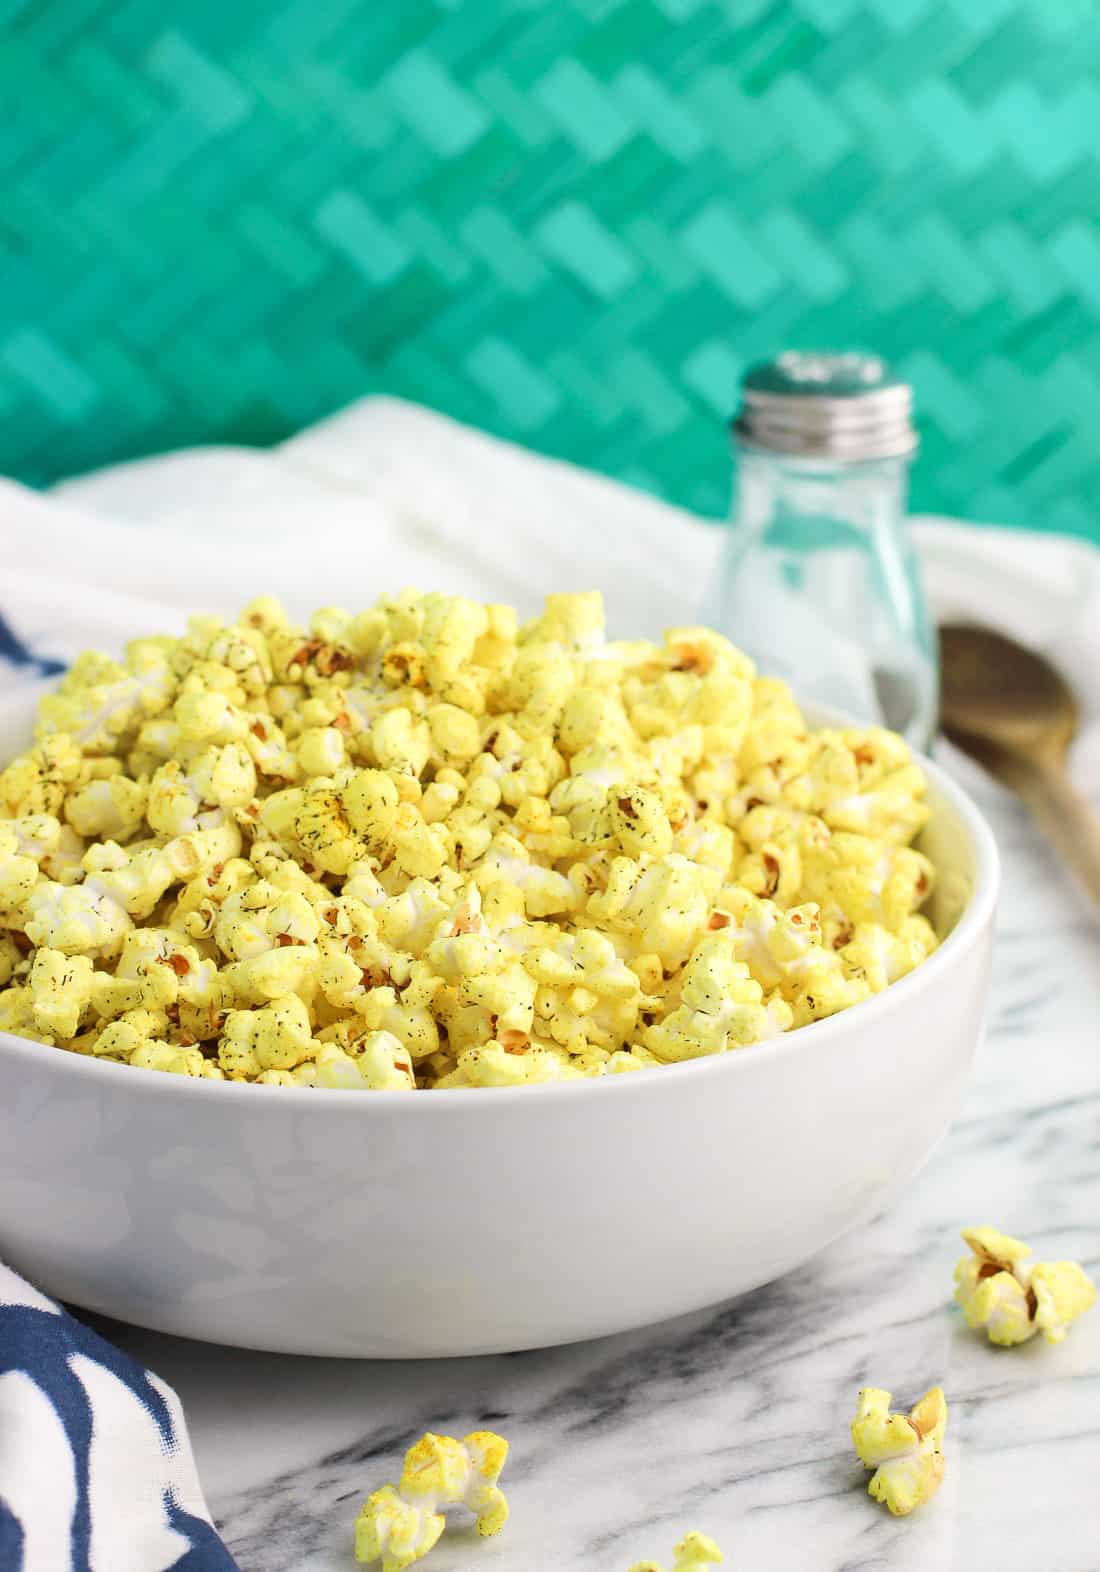 A shallow serving bowl of turmeric popcorn in front of a salt shaker